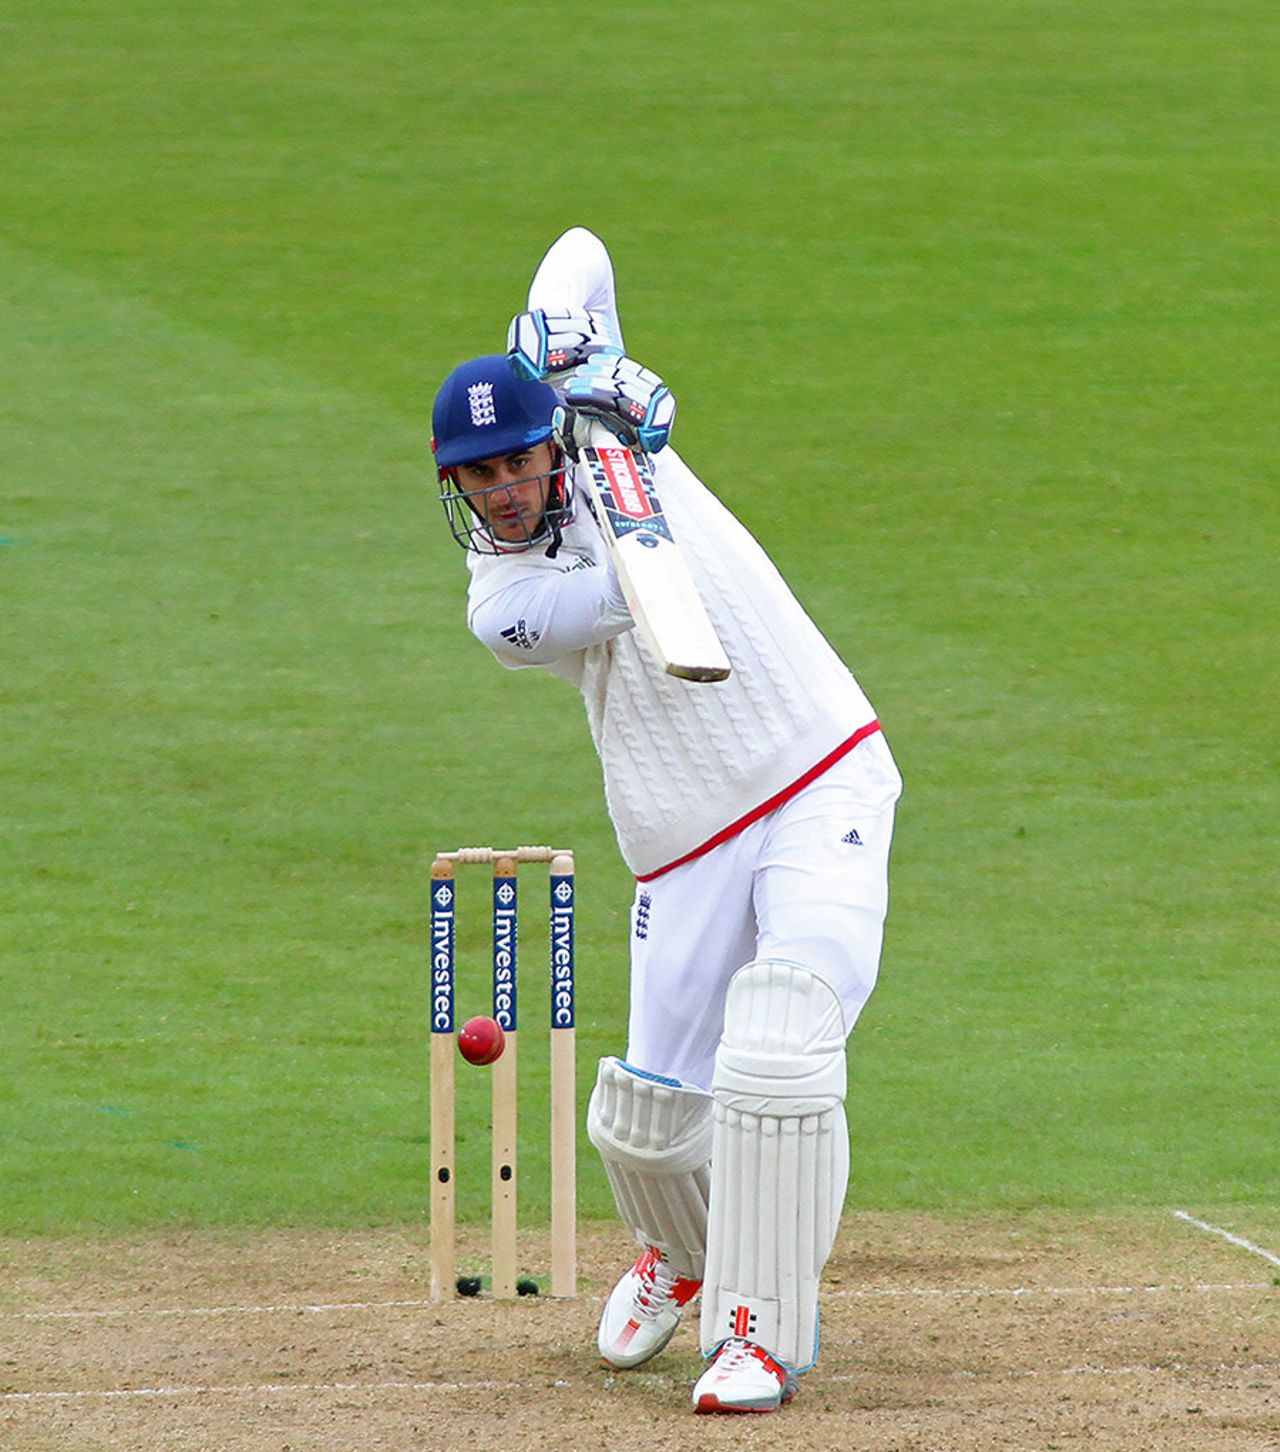 Alex Hales plays a compact drive down the ground, England v Sri Lanka, 2nd Test, Chester-le-Street, 1st day, May 27, 2016